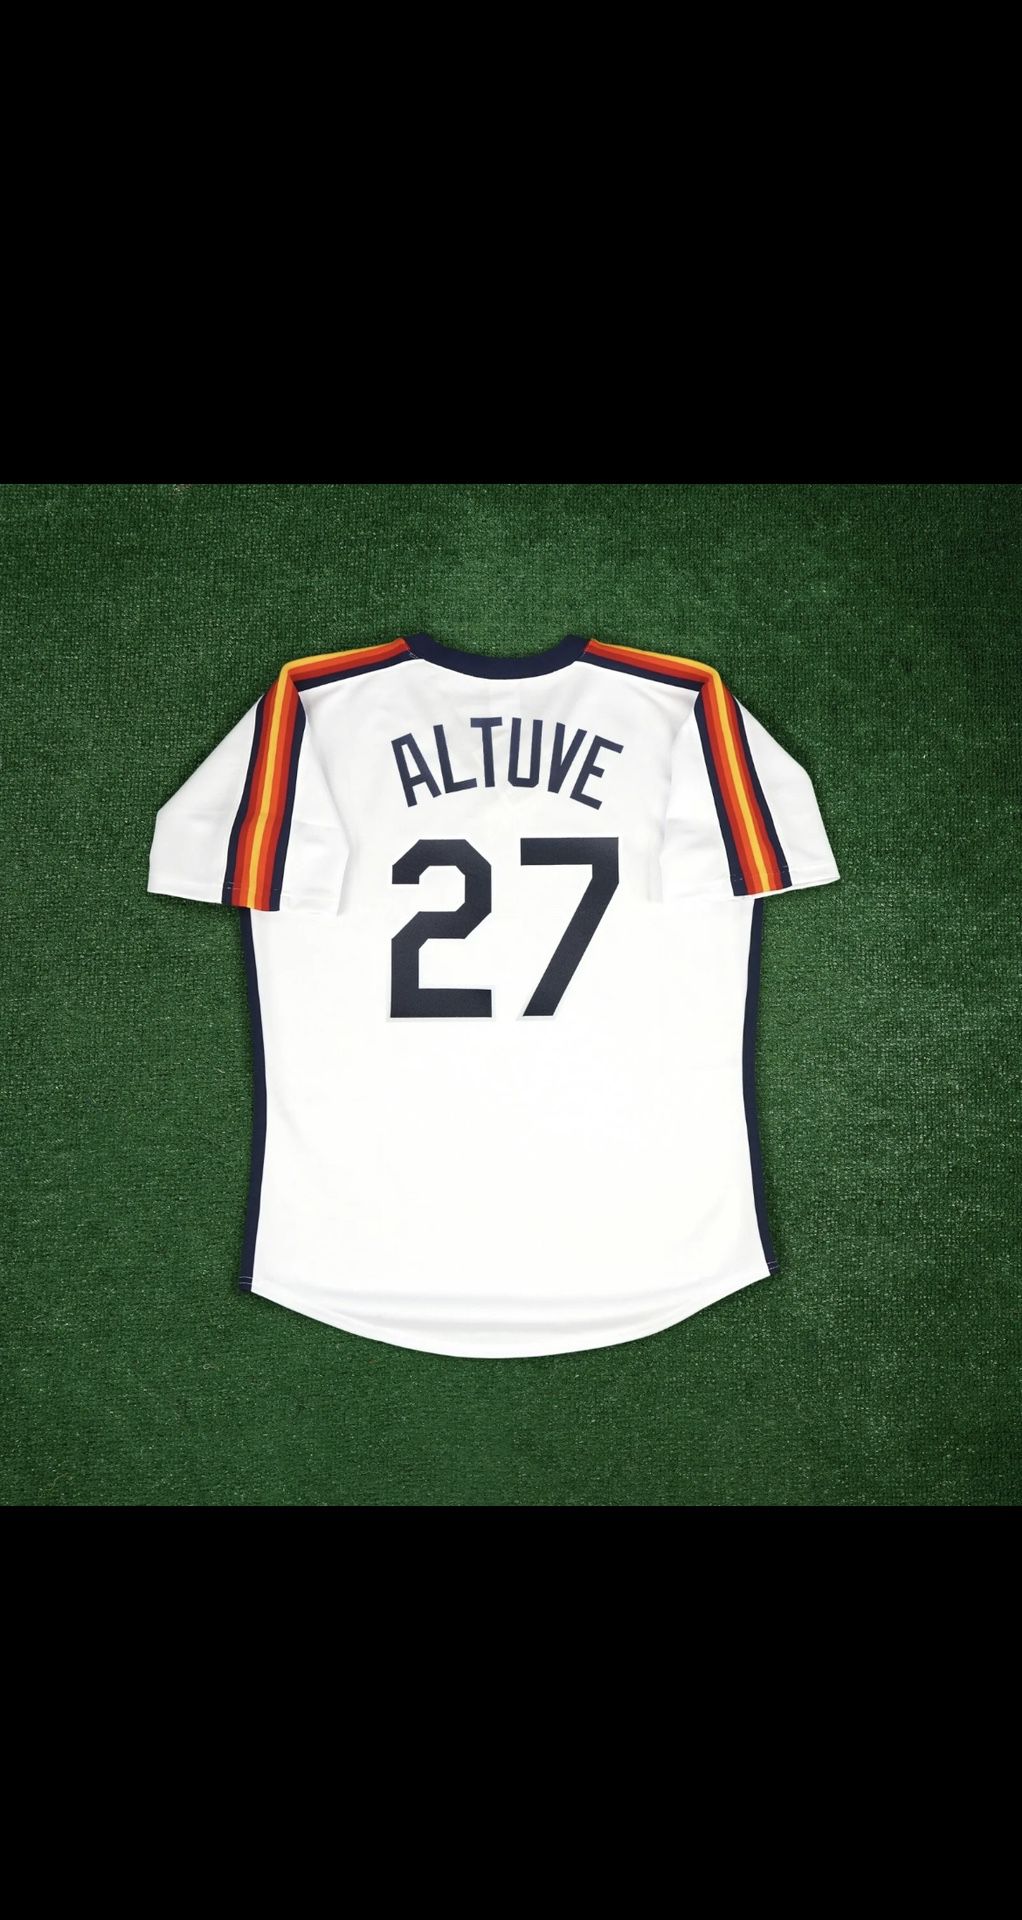 Jose Altuve 1990 Houston Astros Cooperstown Men's Home White Jersey for  Sale in Houston, TX - OfferUp